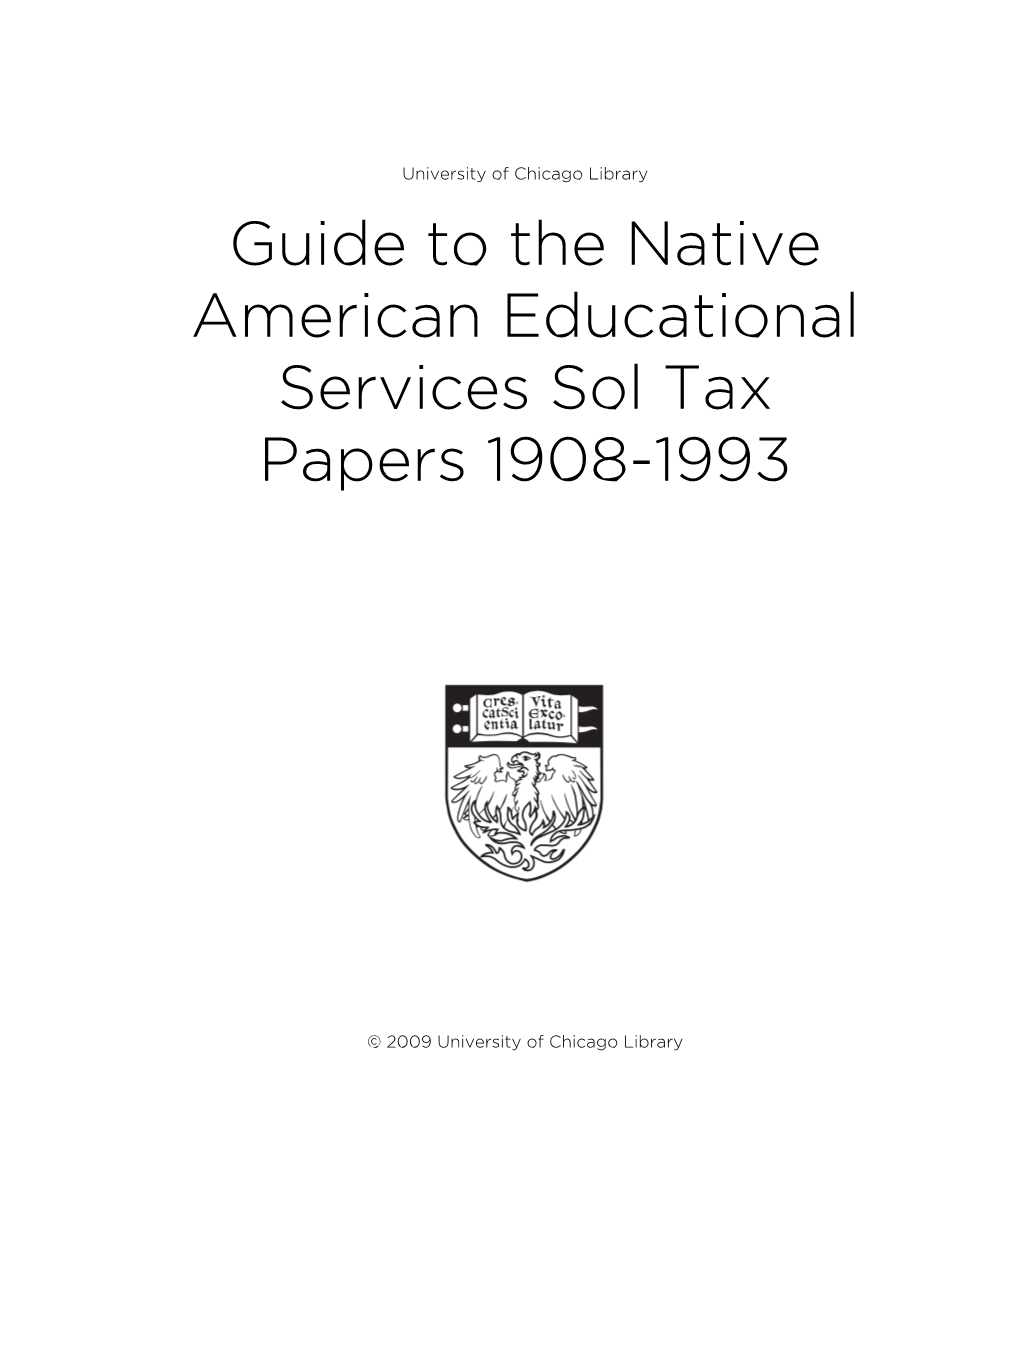 Guide to the Native American Educational Services Sol Tax Papers 1908-1993